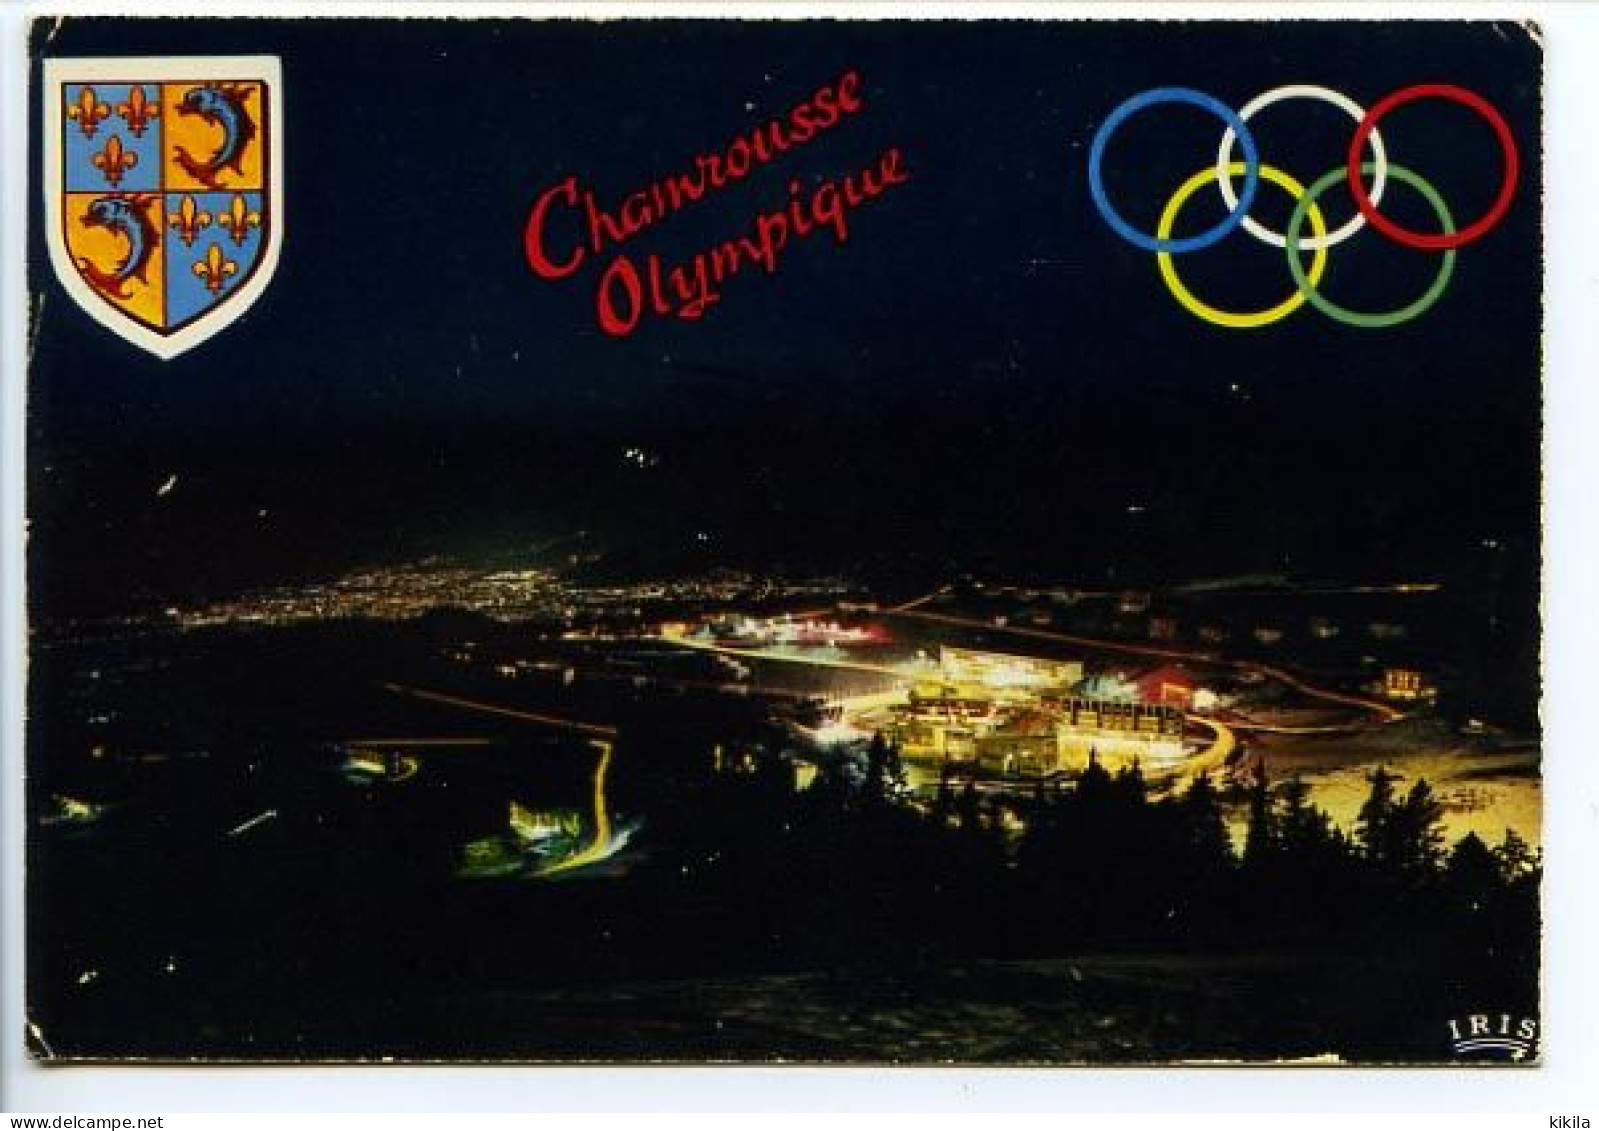 CPSM 10.5 X 15  CHAMROUSSE Olympique Jeux Olympiques D'Hiver De Grenoble 1968  Olympic Games - Chamrousse